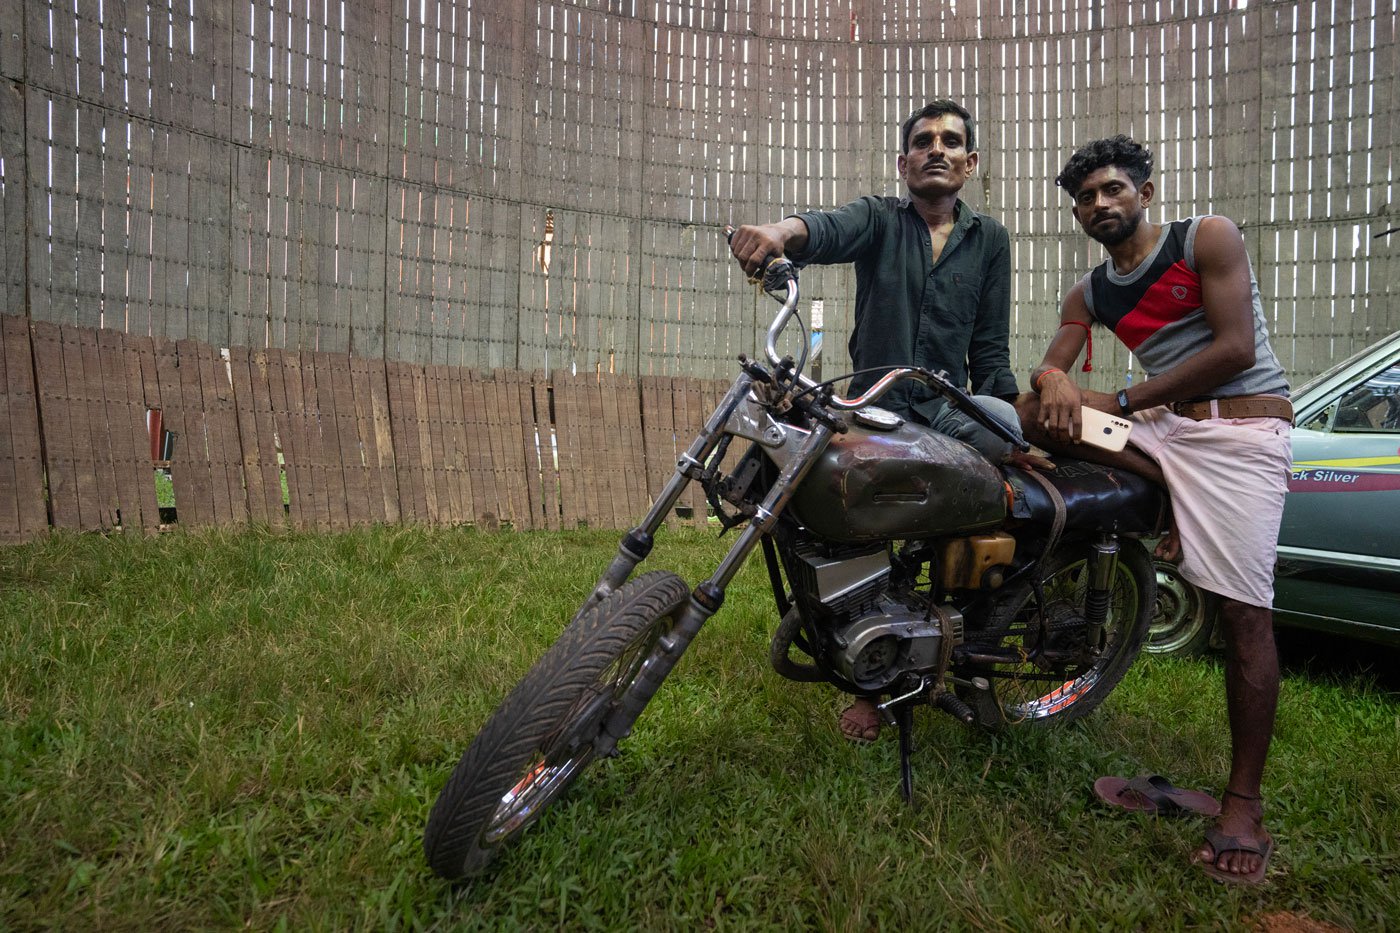 Jagga Ansari (left) and Pankaj Kumar (right) pose for a portrait inside the ‘well of death’ with one of the bikes they ride during the act